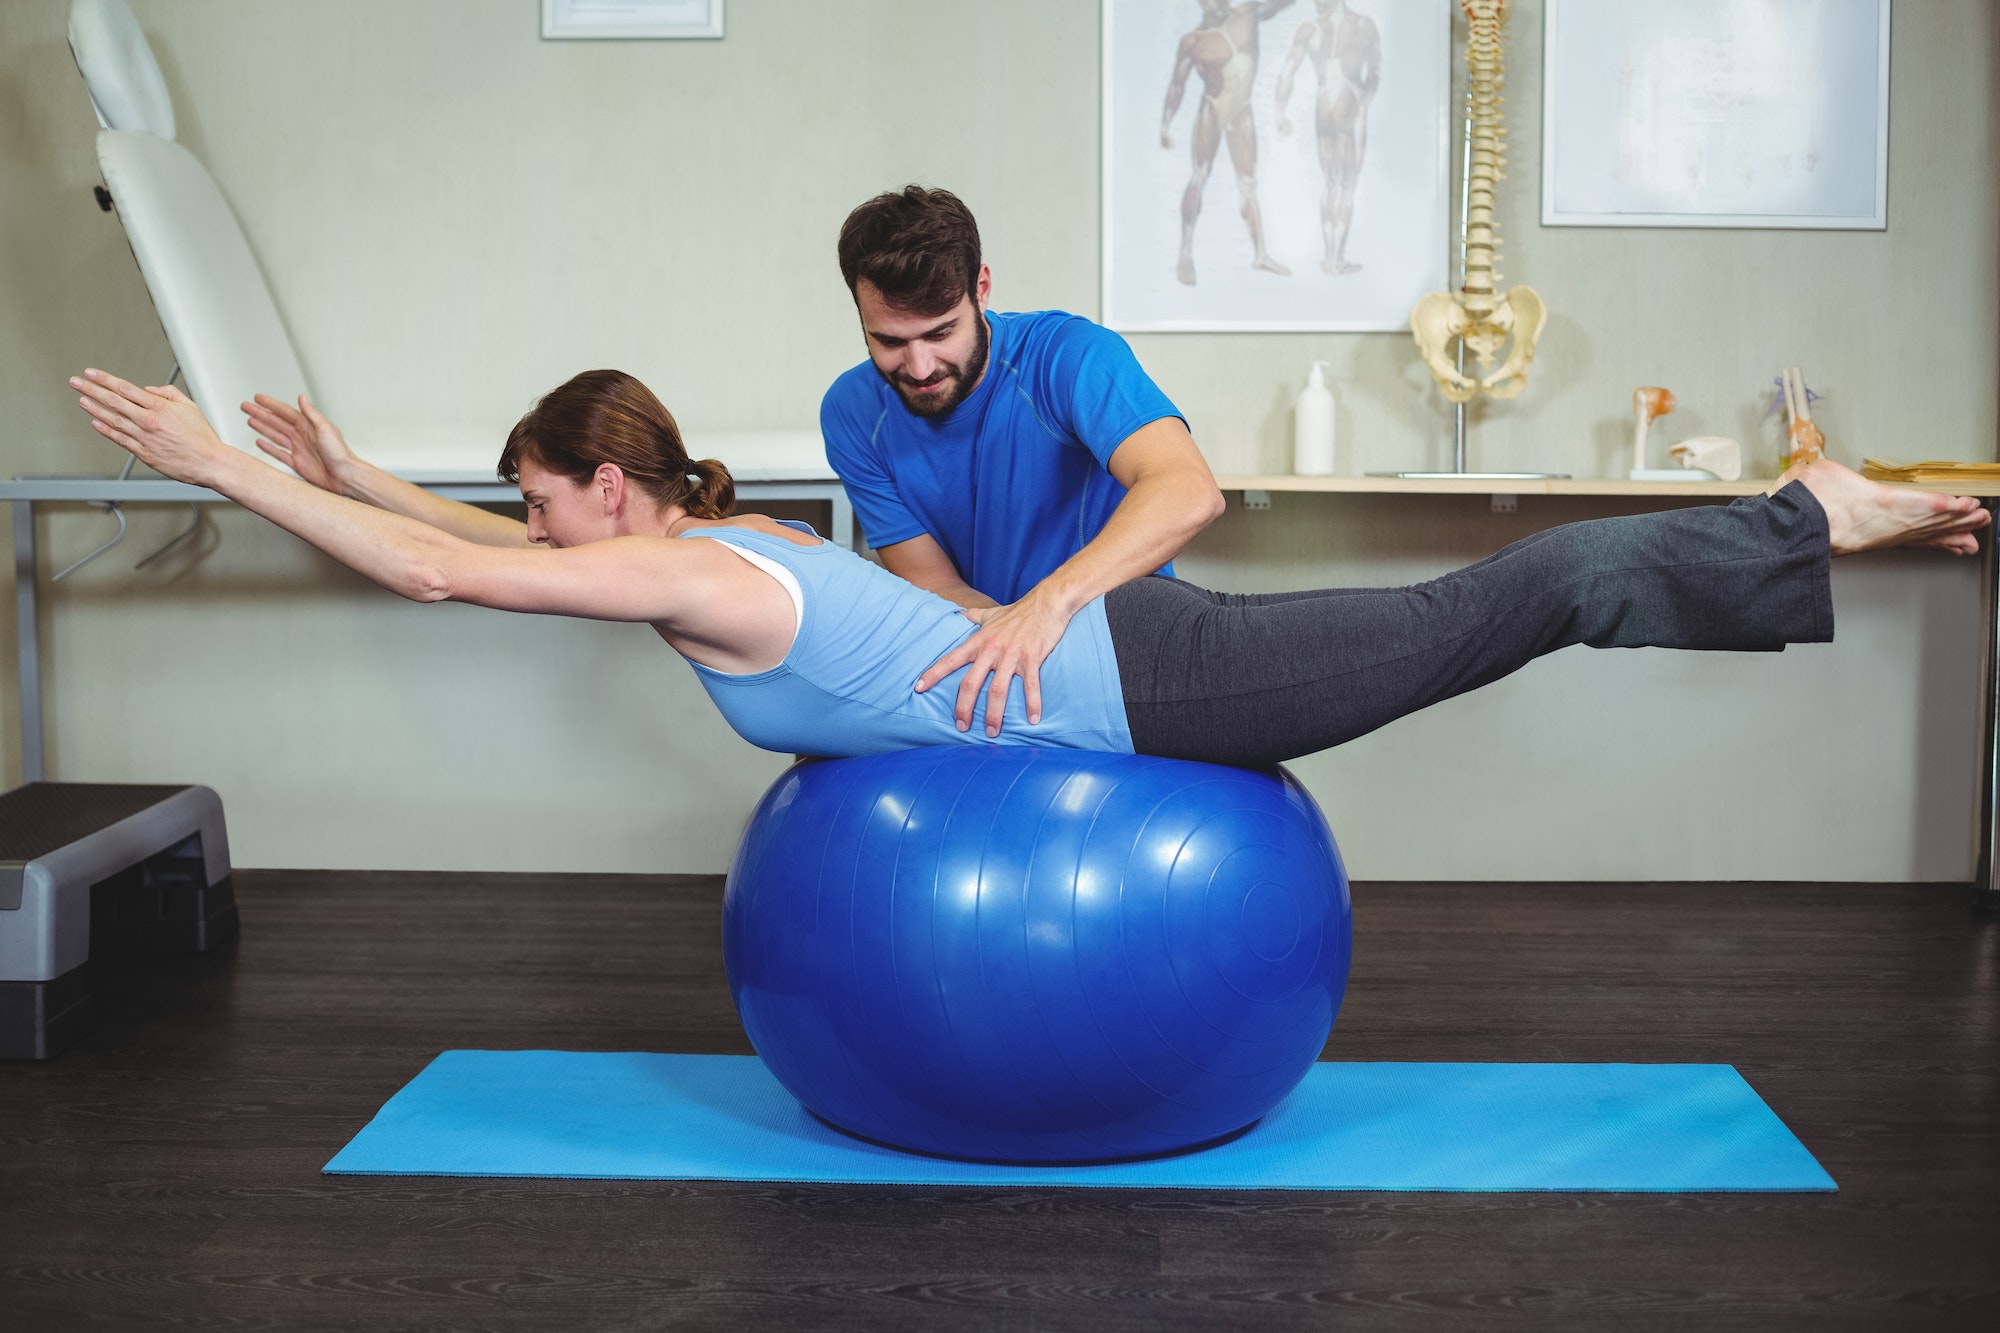 Physiotherapist assisting woman on exercise ball